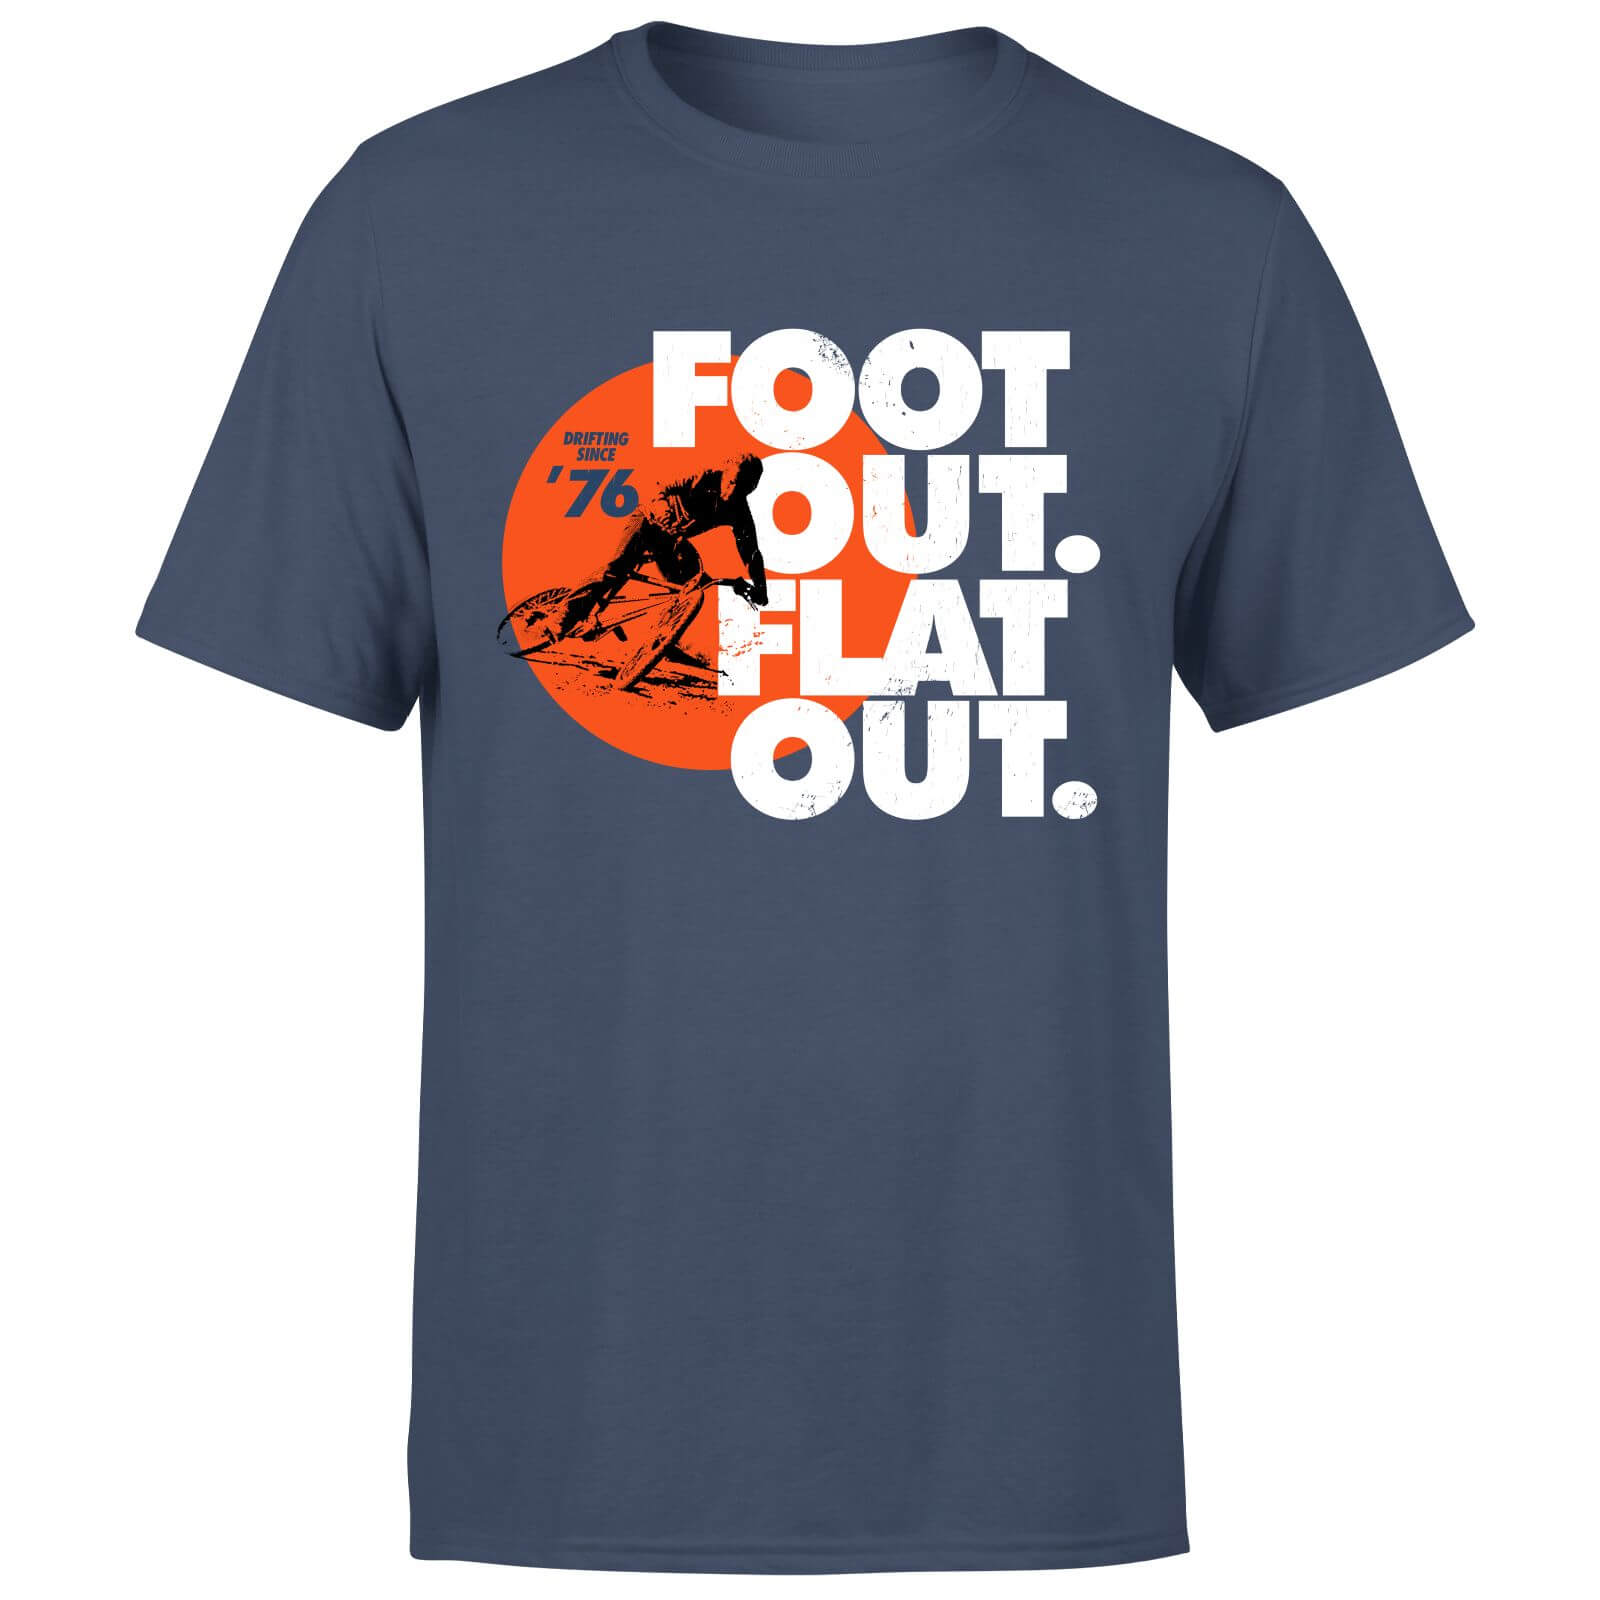 Foot Out. Flat Out. Men's T-Shirt - Navy - S - Navy